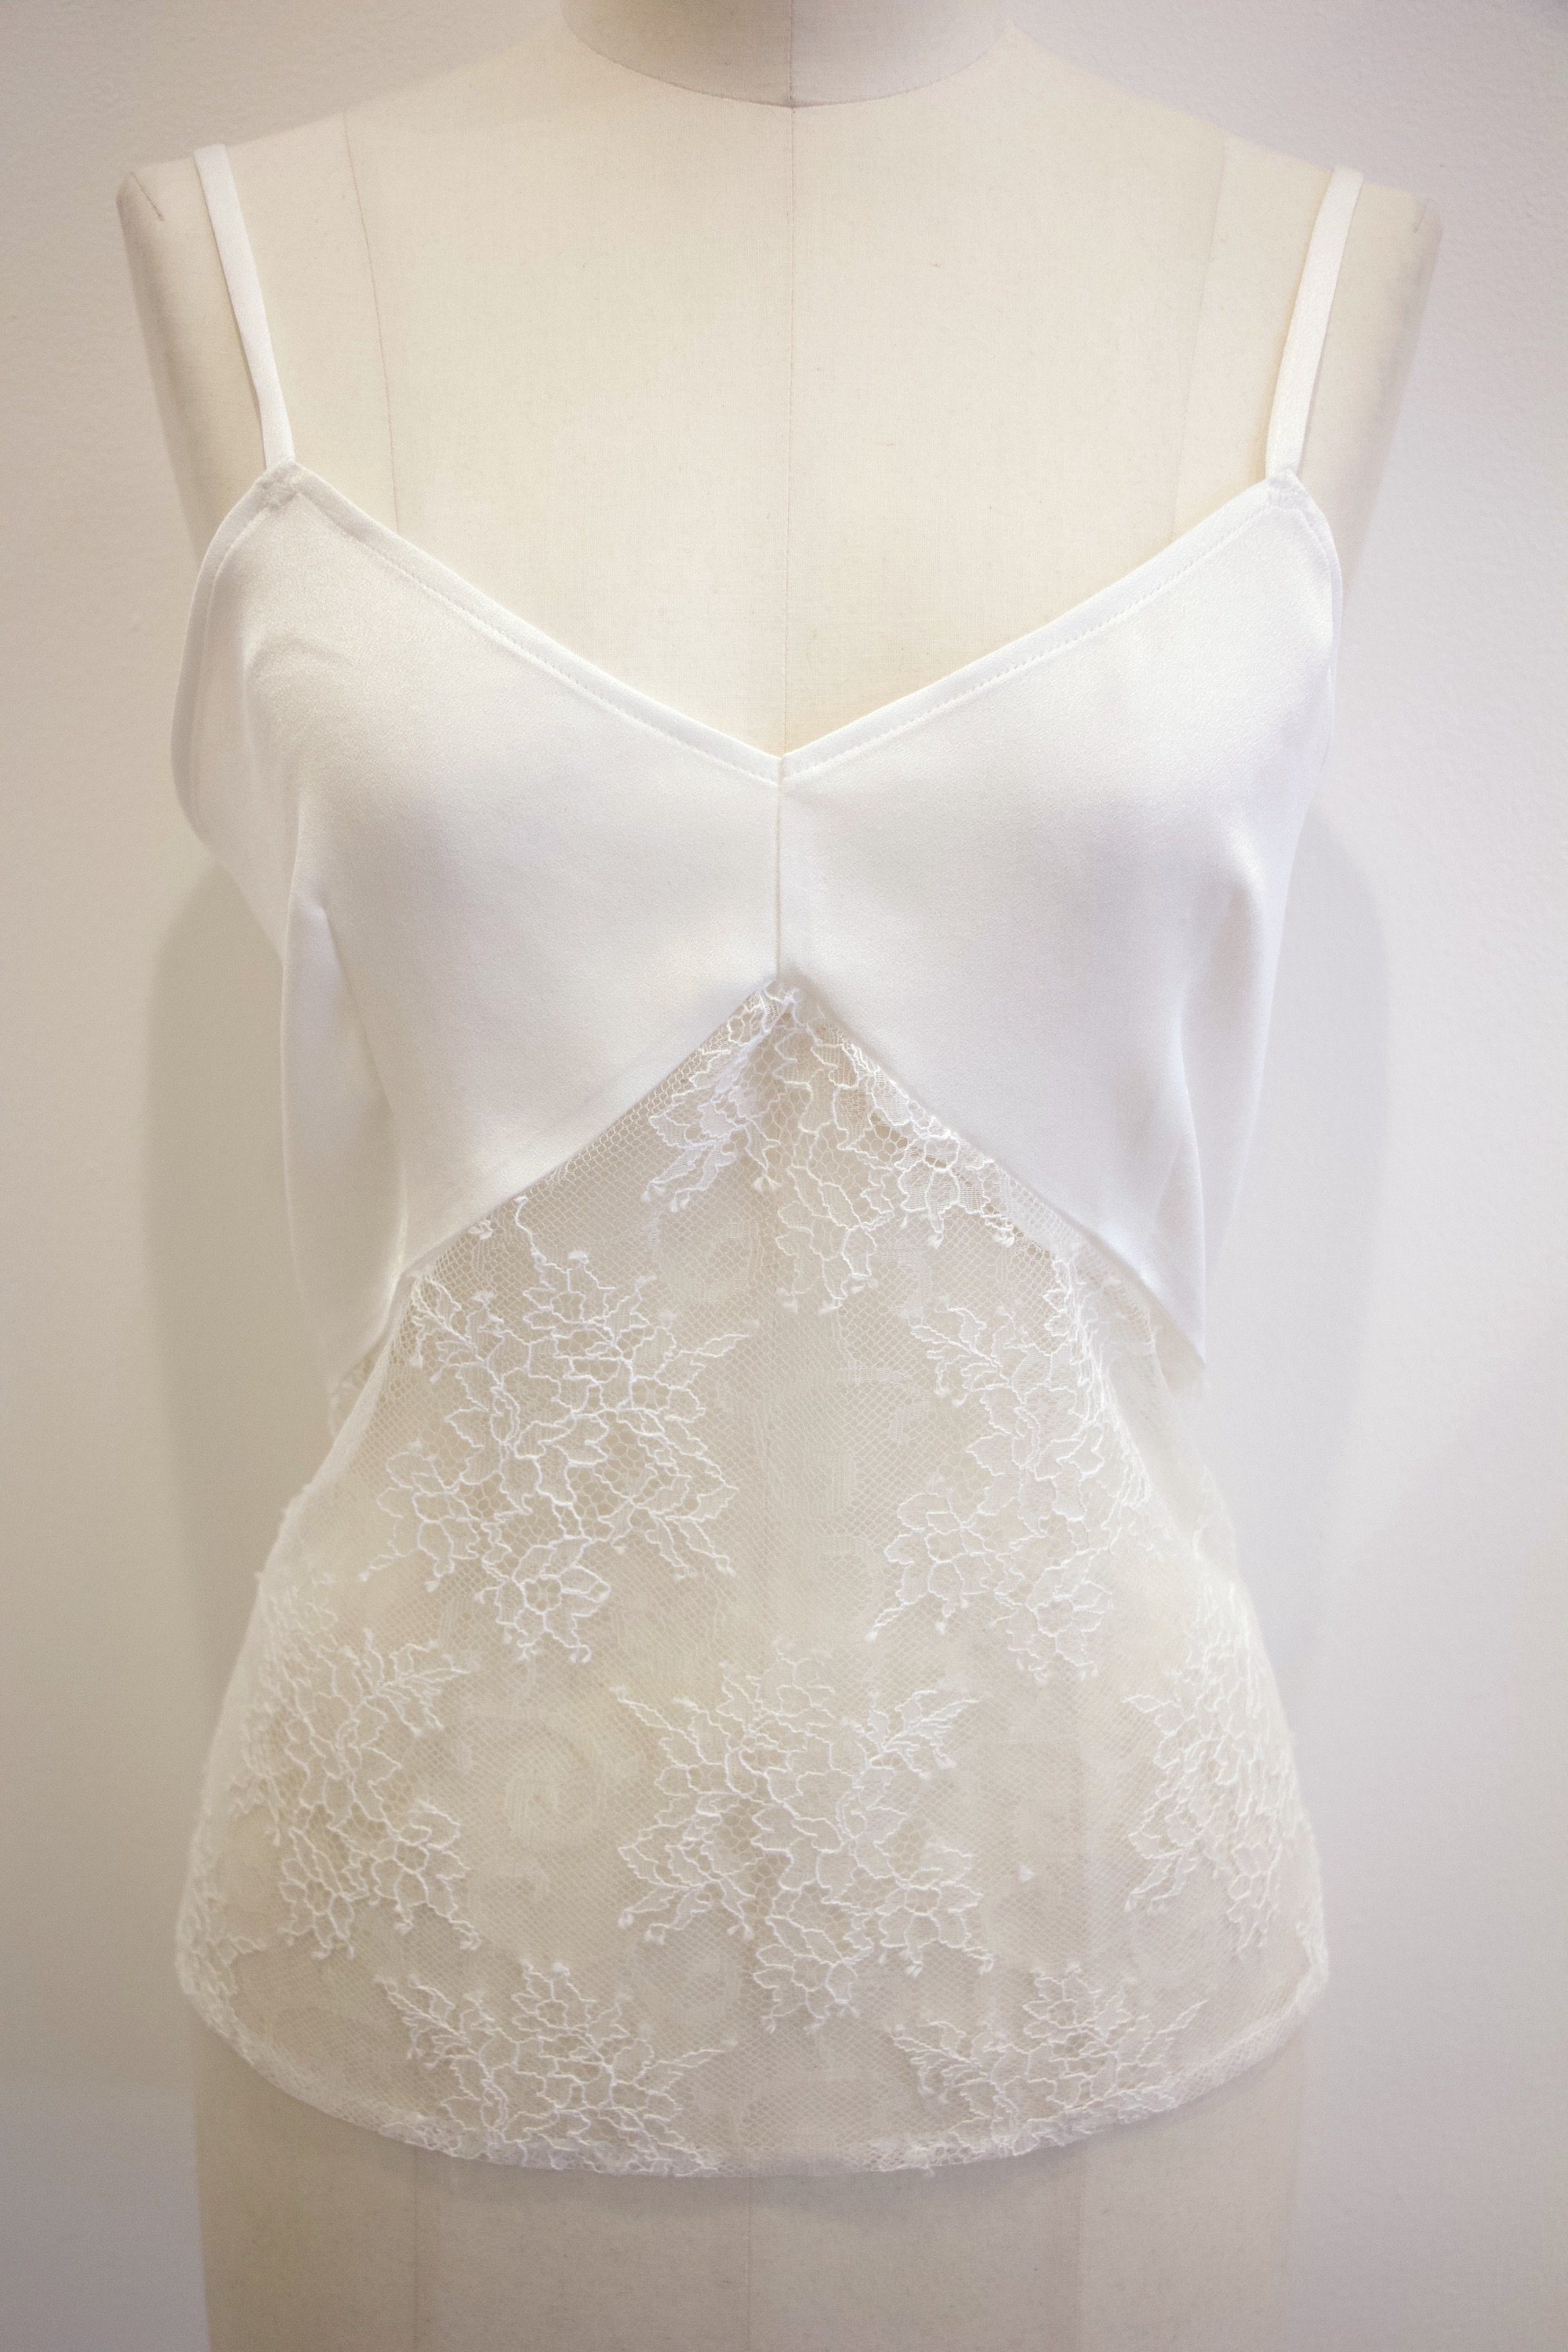 <img class='new_mark_img1' src='https://img.shop-pro.jp/img/new/icons10.gif' style='border:none;display:inline;margin:0px;padding:0px;width:auto;' />f's6 Lace satin camisole / White